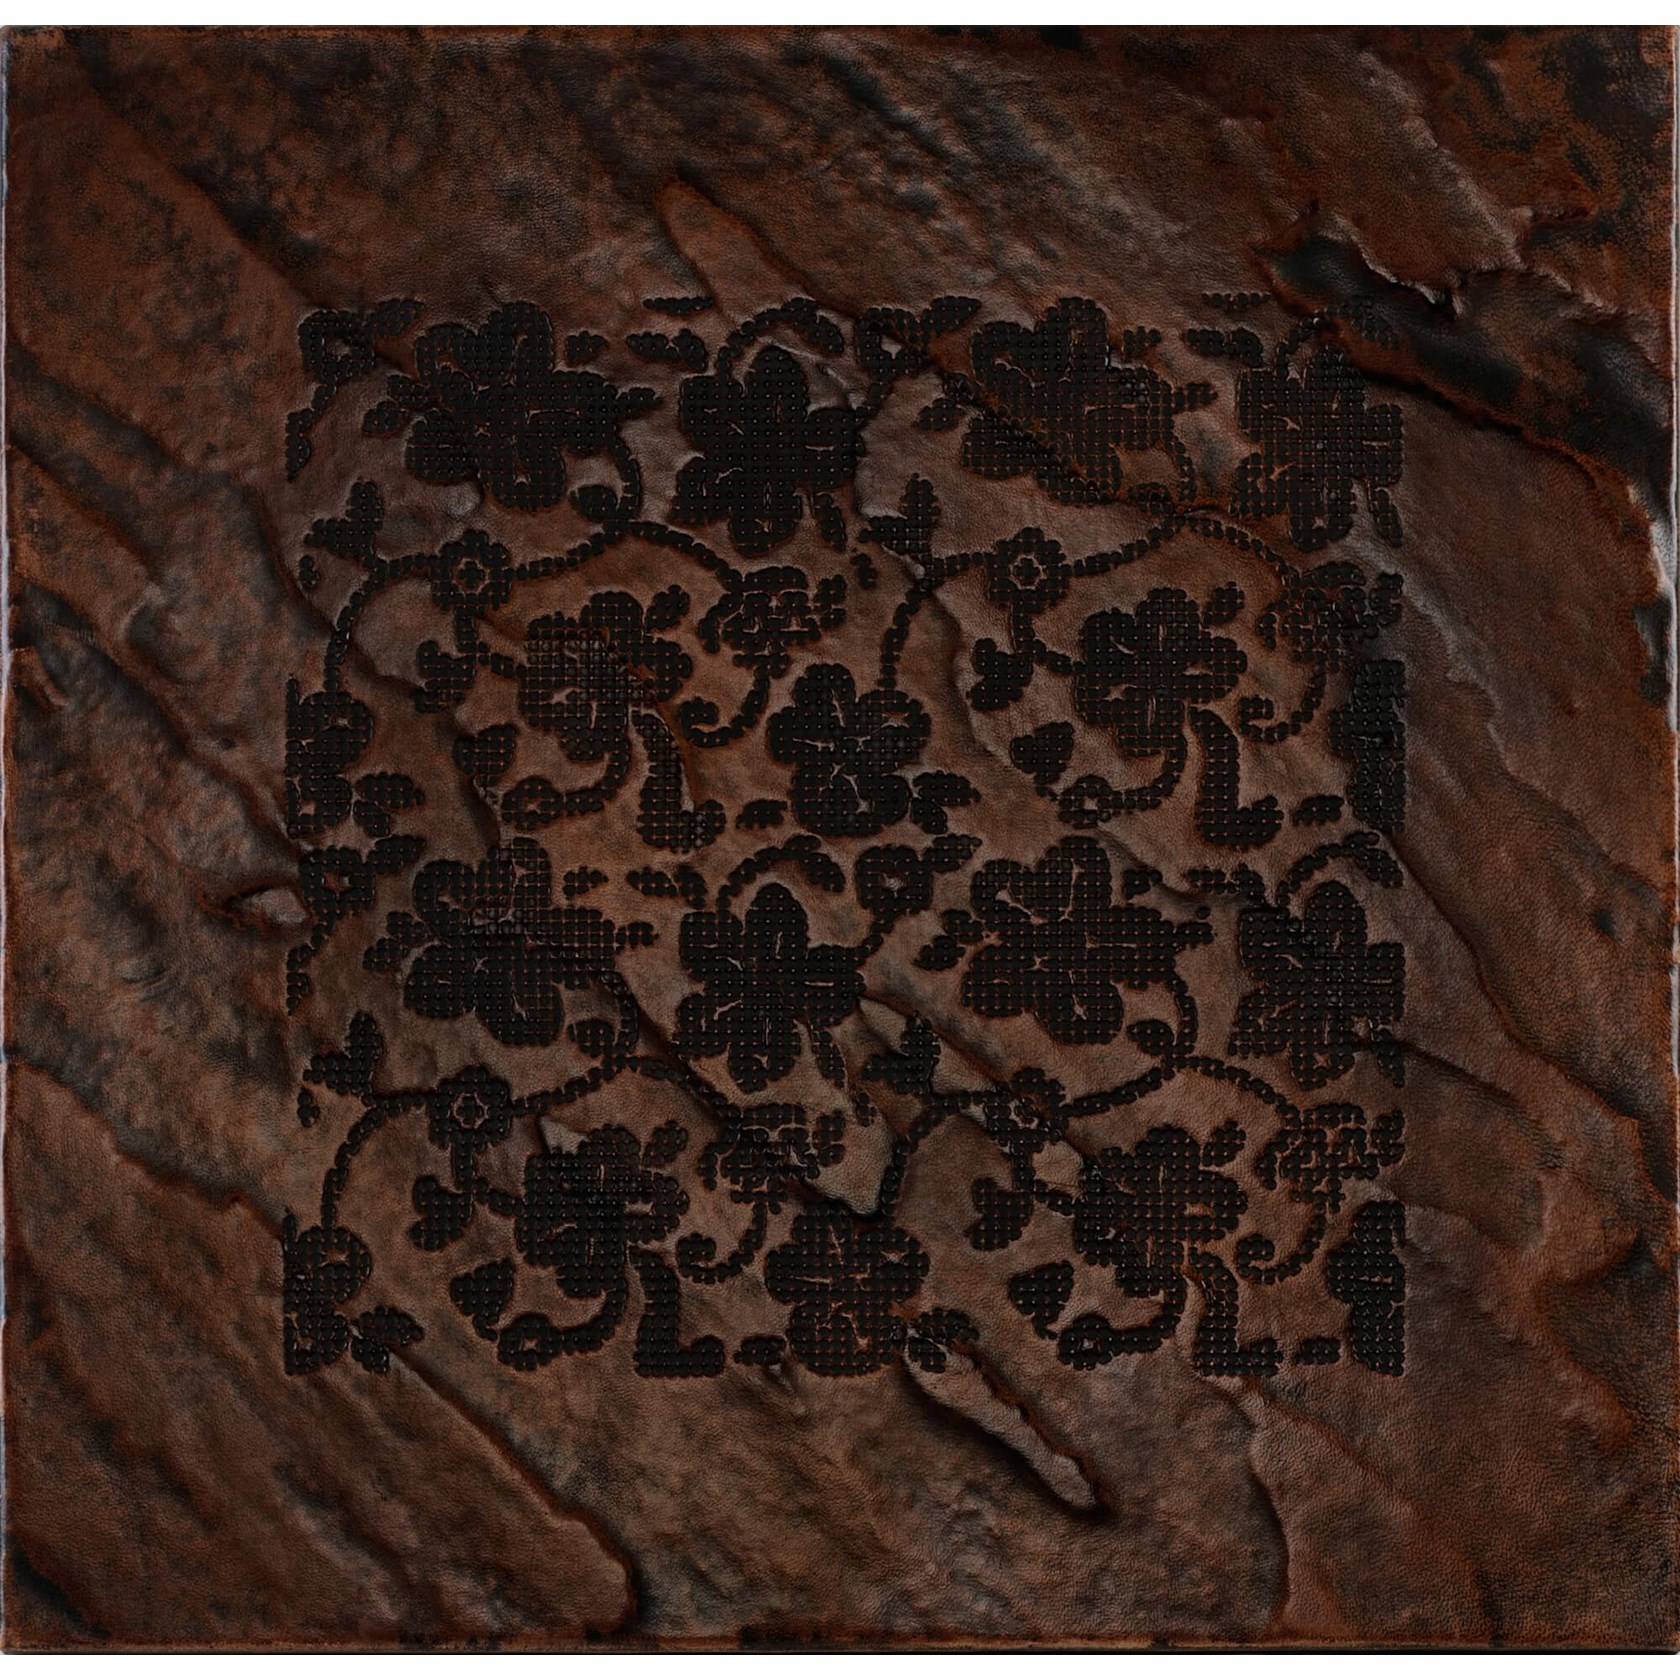 Leather Stone - Embossed